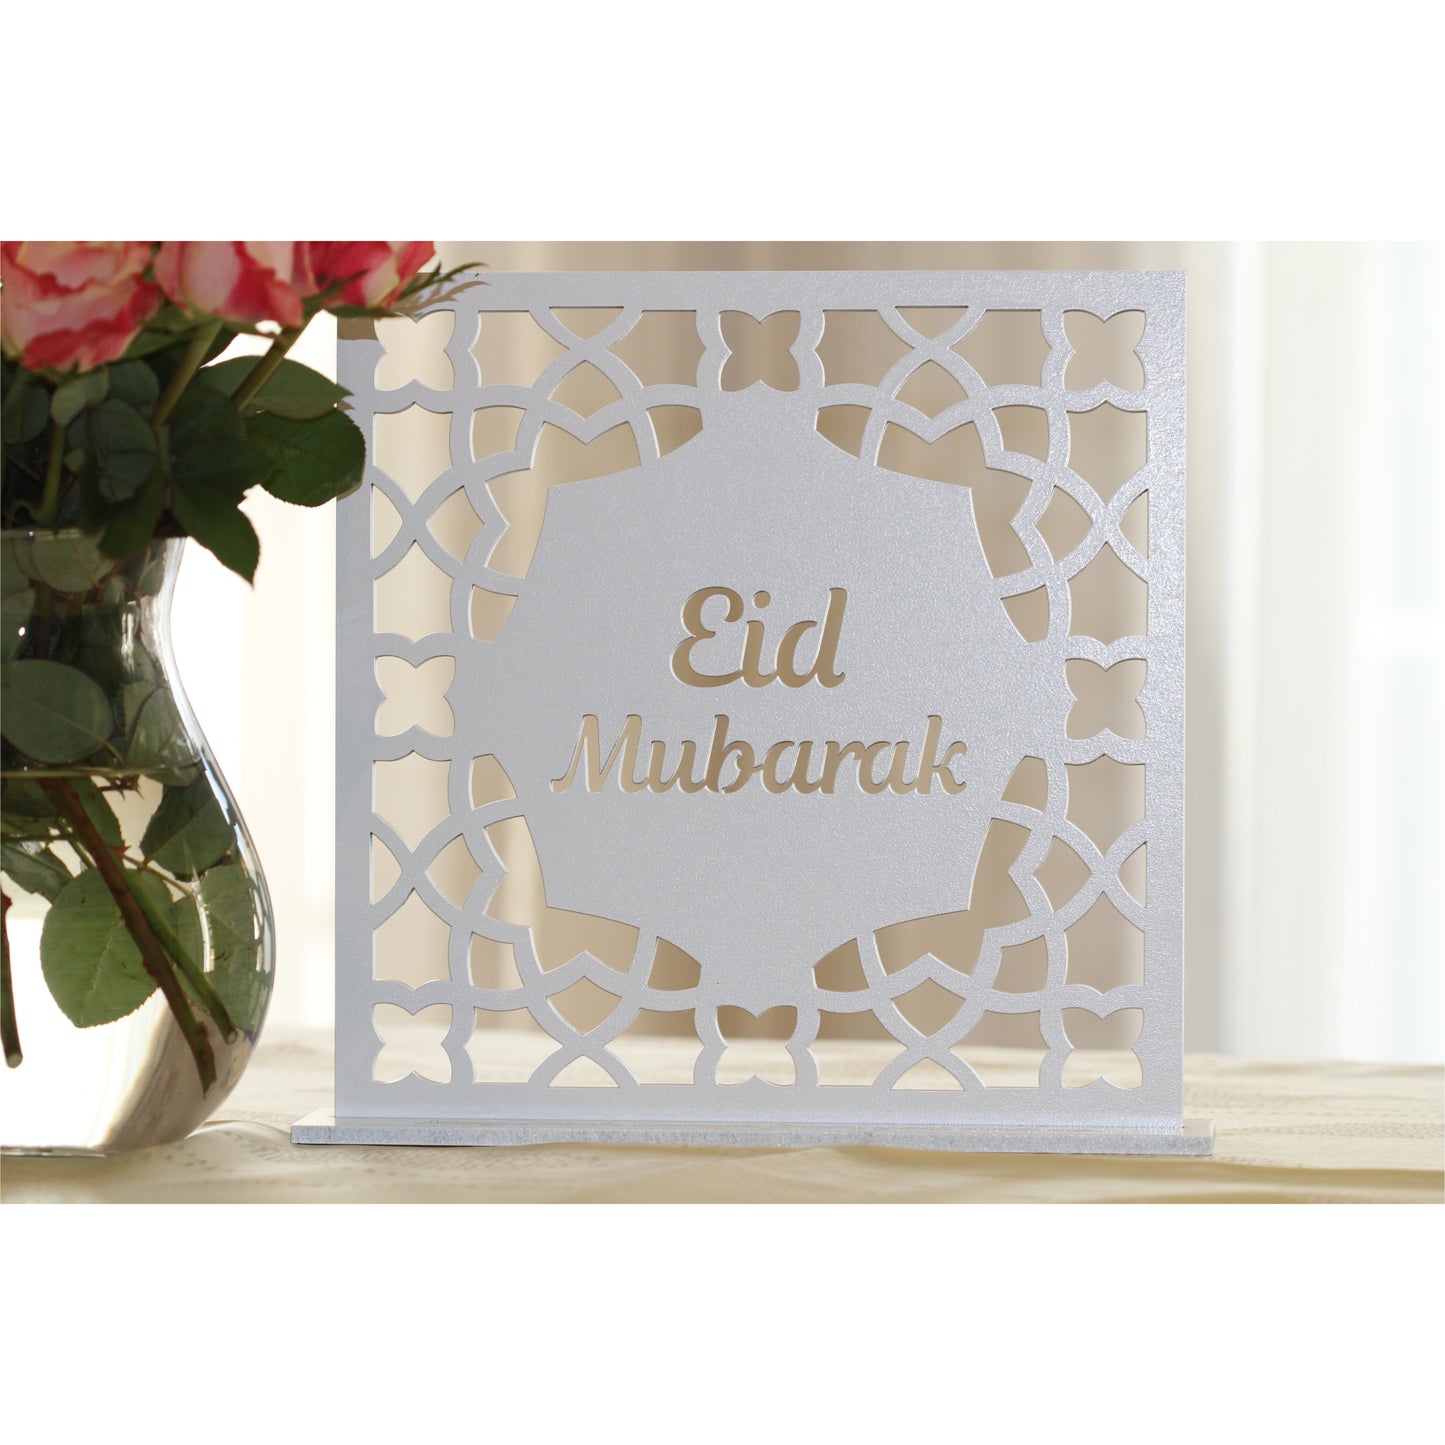 Eid Mubarak Wooden Table Stand (Gold / White)